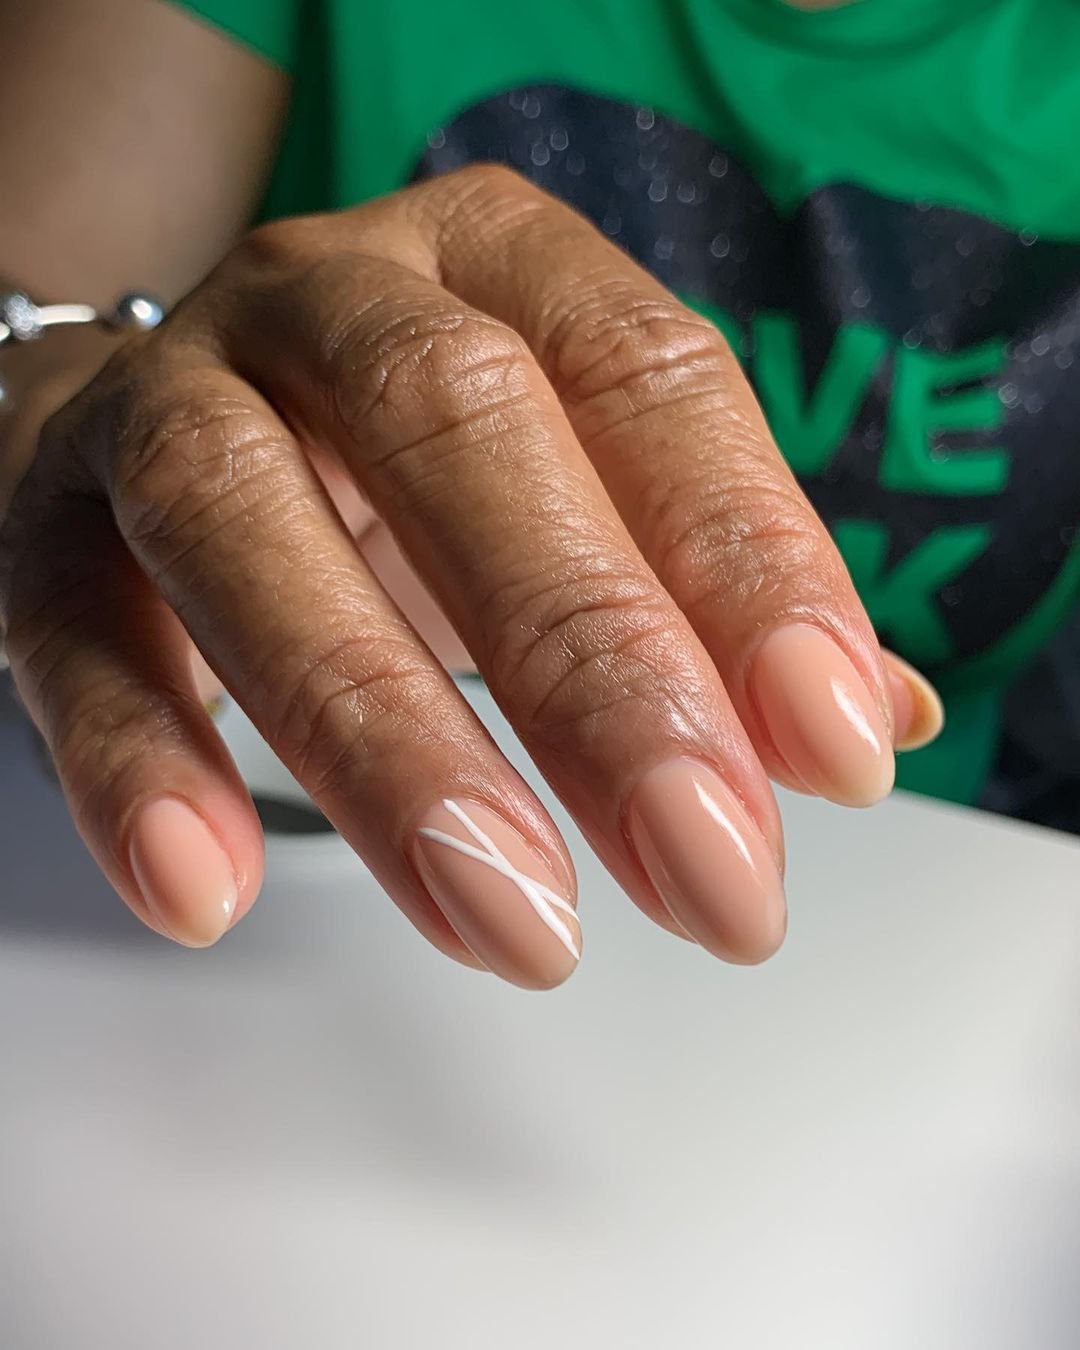 Hard gel overlay on my client's natural nails! Last picture is 2 weeks of  growth and wear. No lifting or chipping : r/Nails